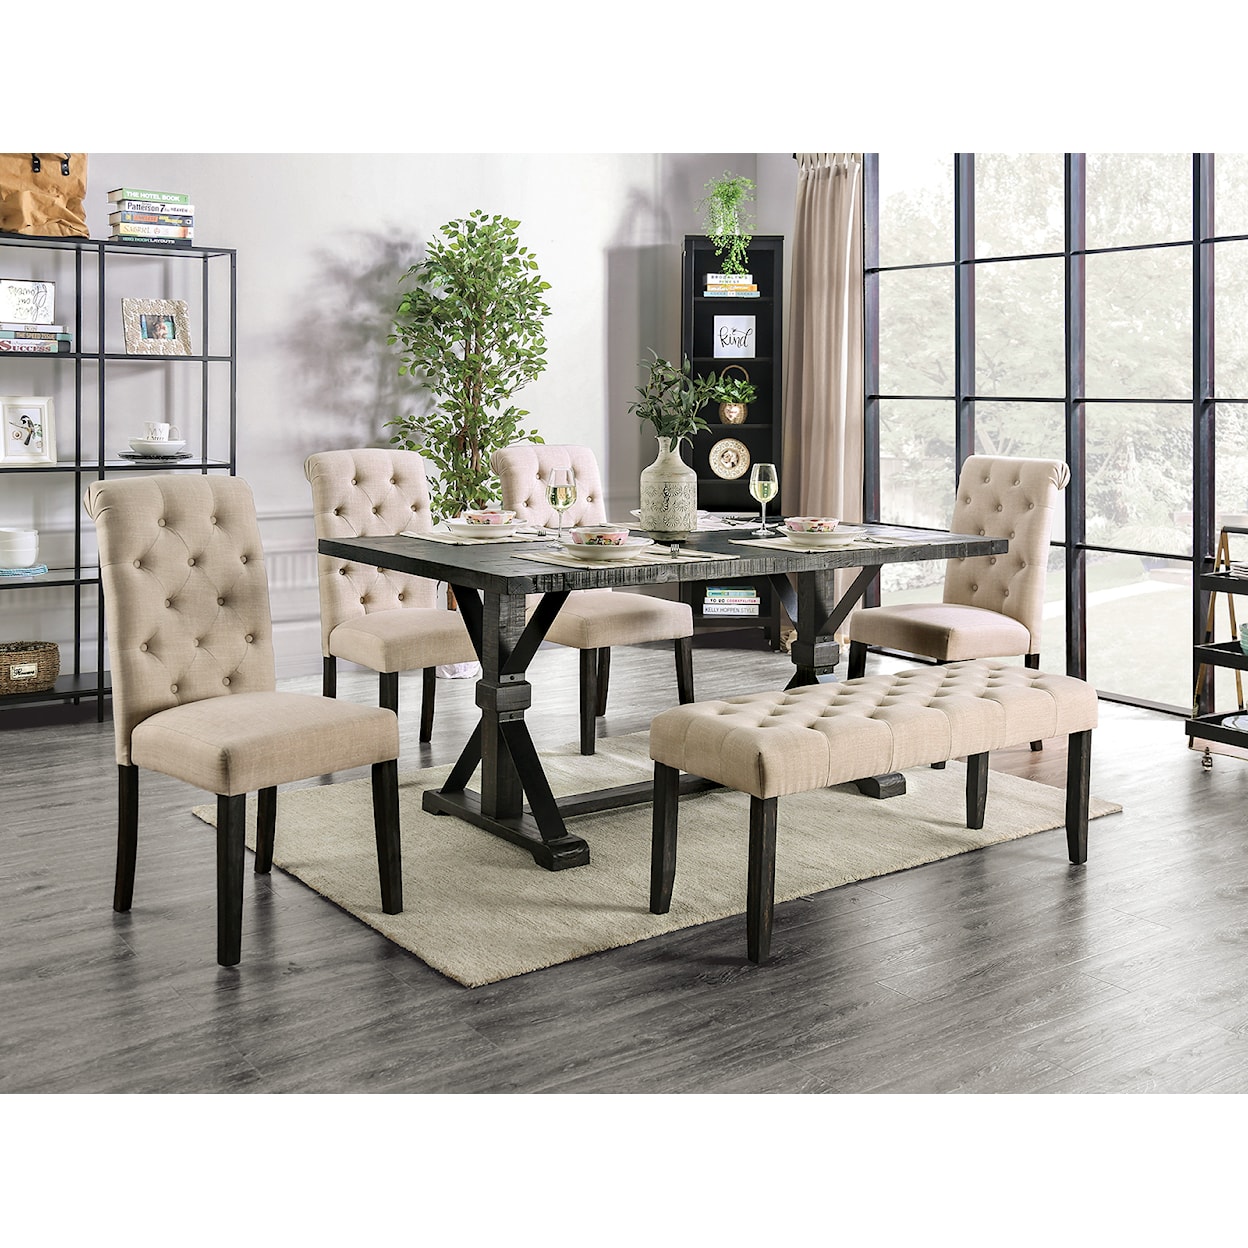 FUSA Alfred 6 Pc. Dining Table Set W/ Bench